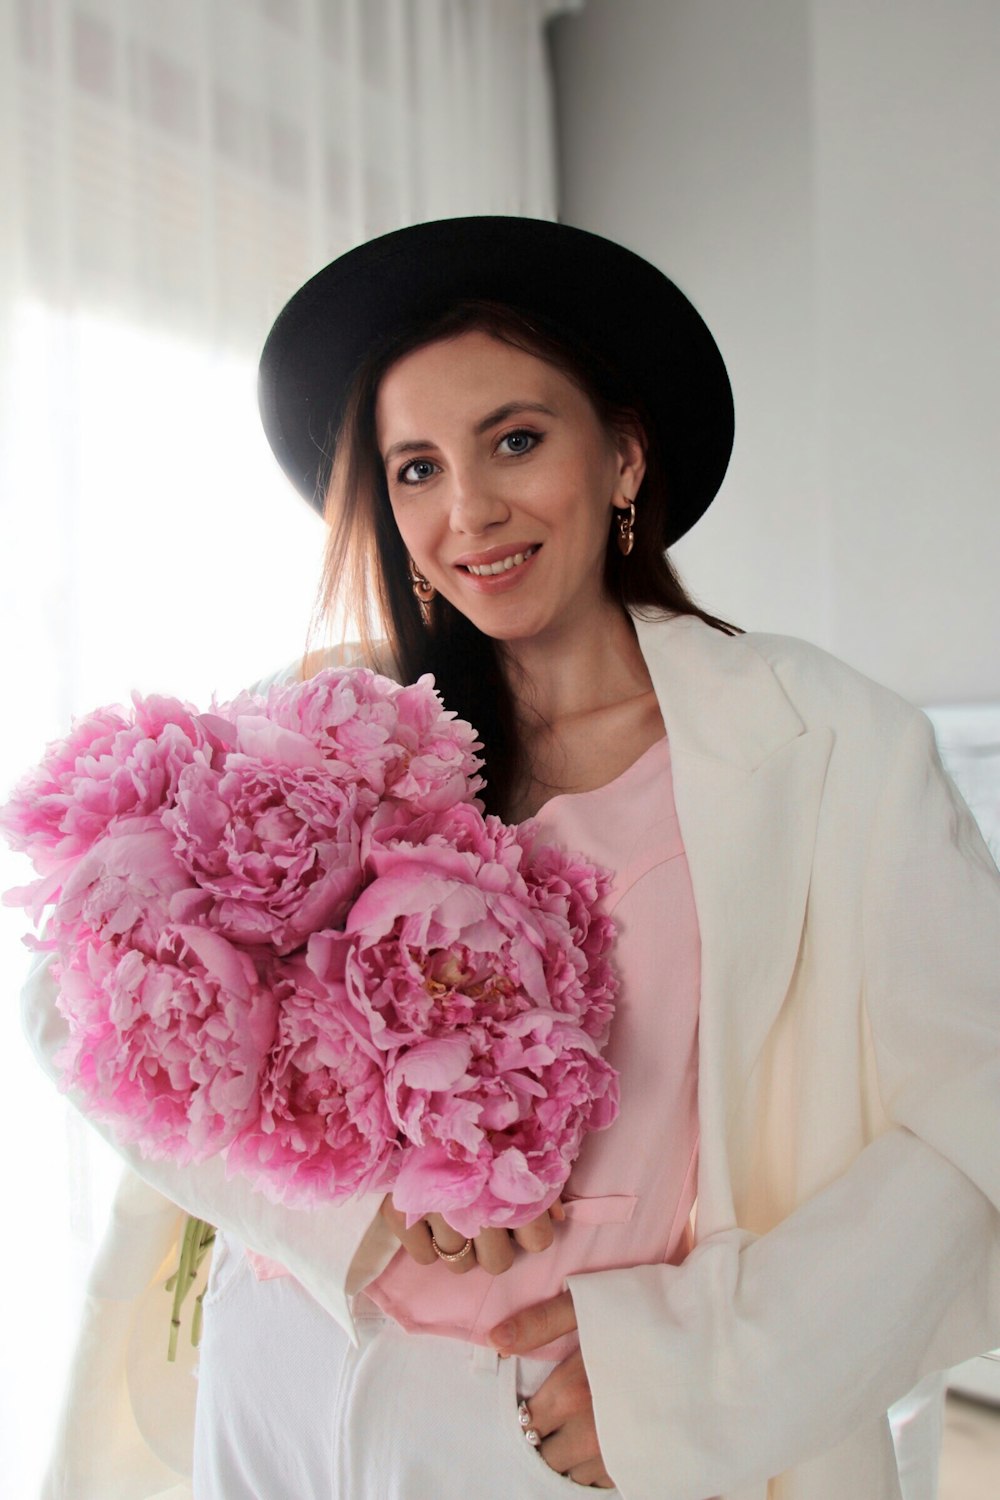 a woman in a hat holding a bouquet of flowers